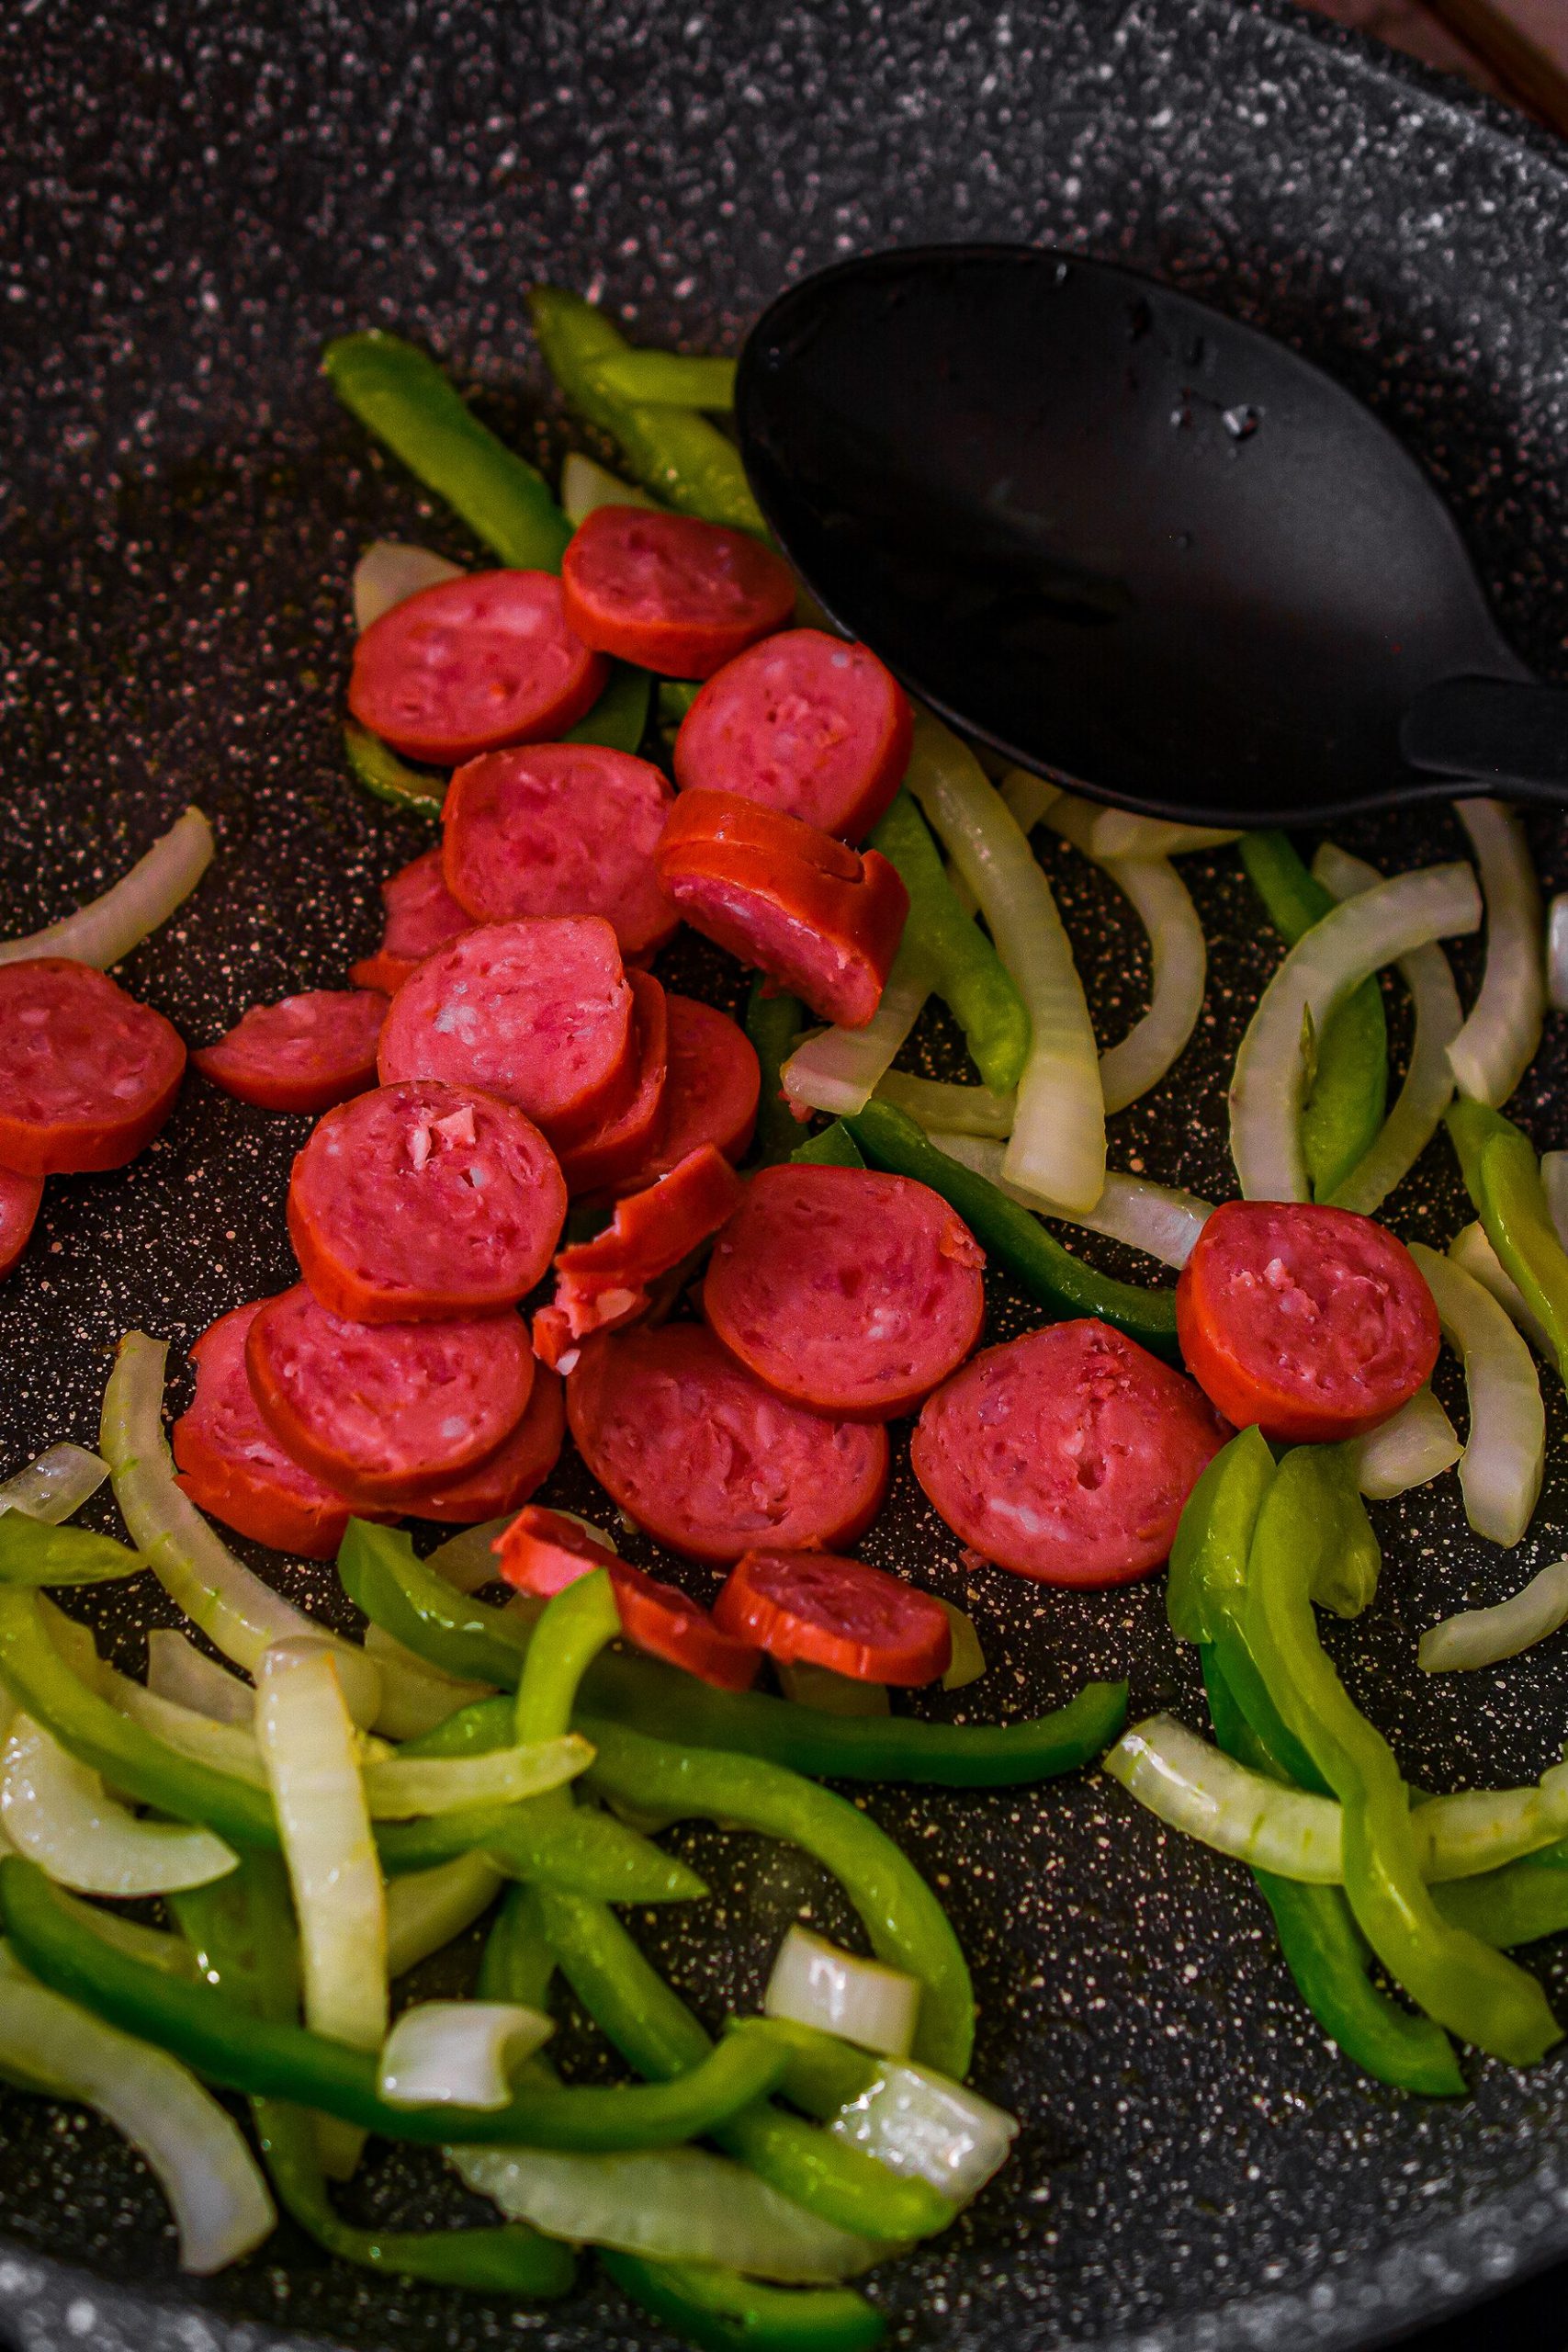 Mix the smoked sausage into the skillet and heat until warmed through. Set aside the vegetable and sausage mixture.